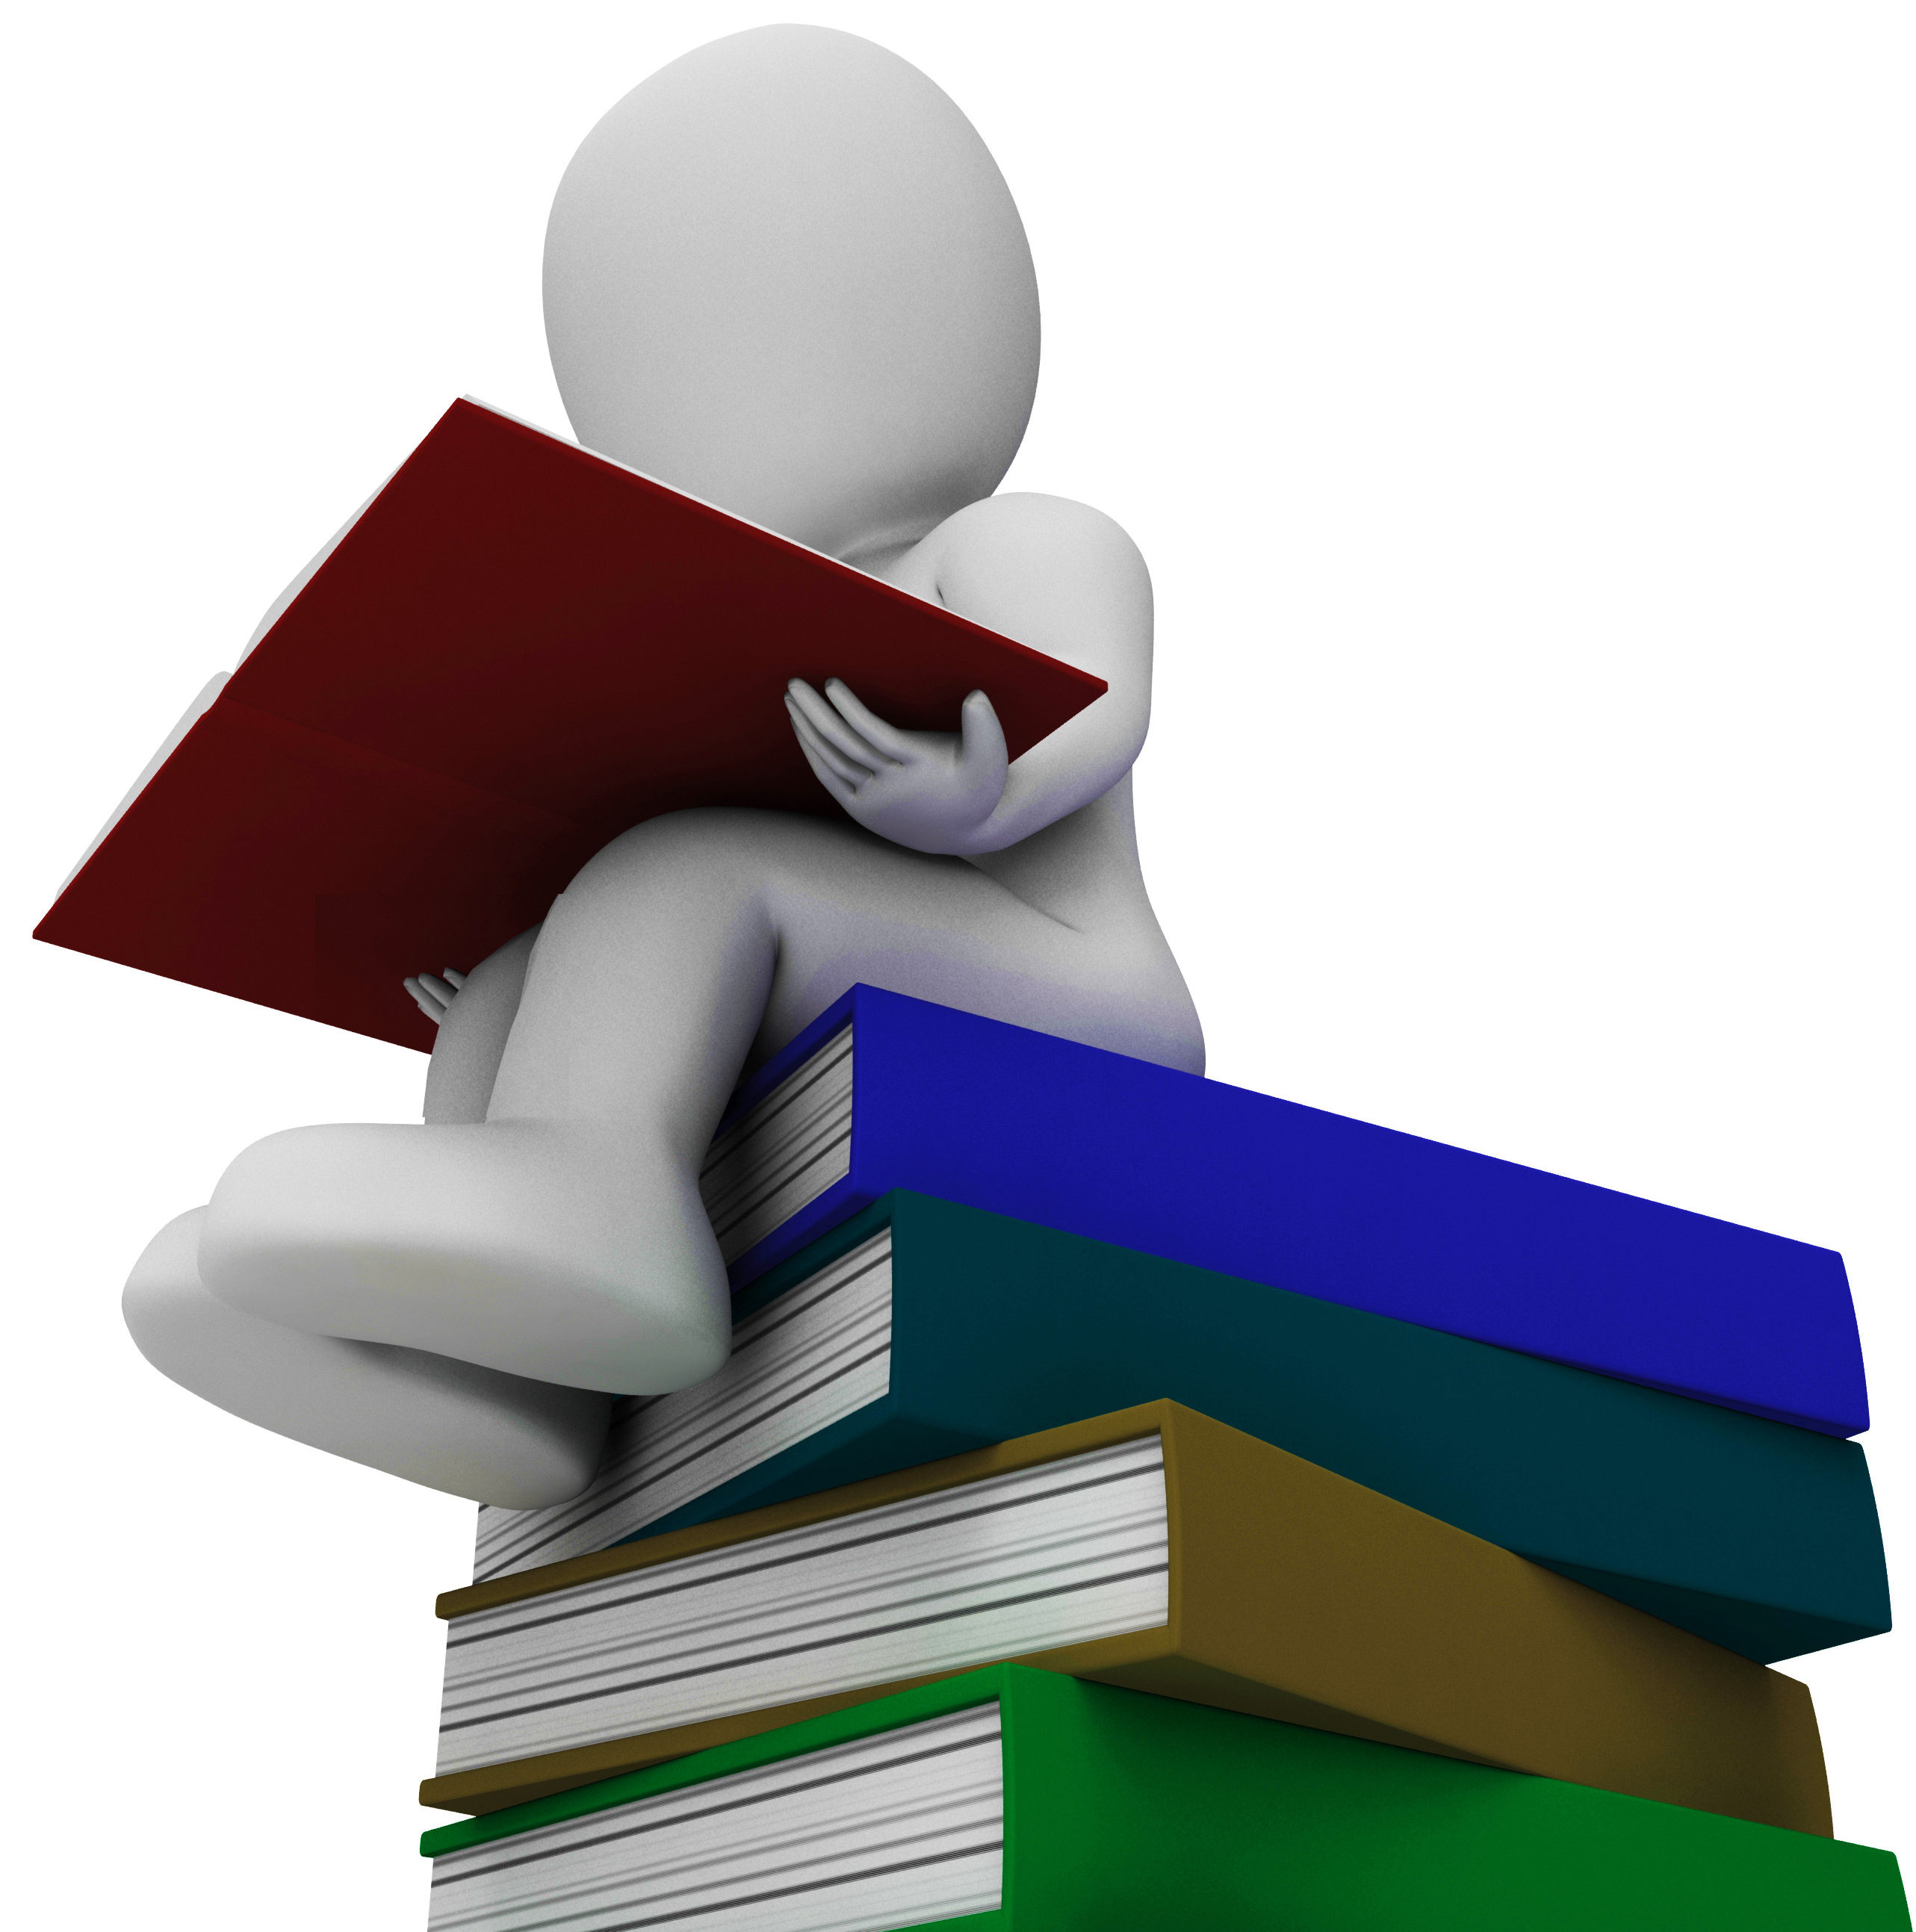 Student And Books Showing Learning And Studying